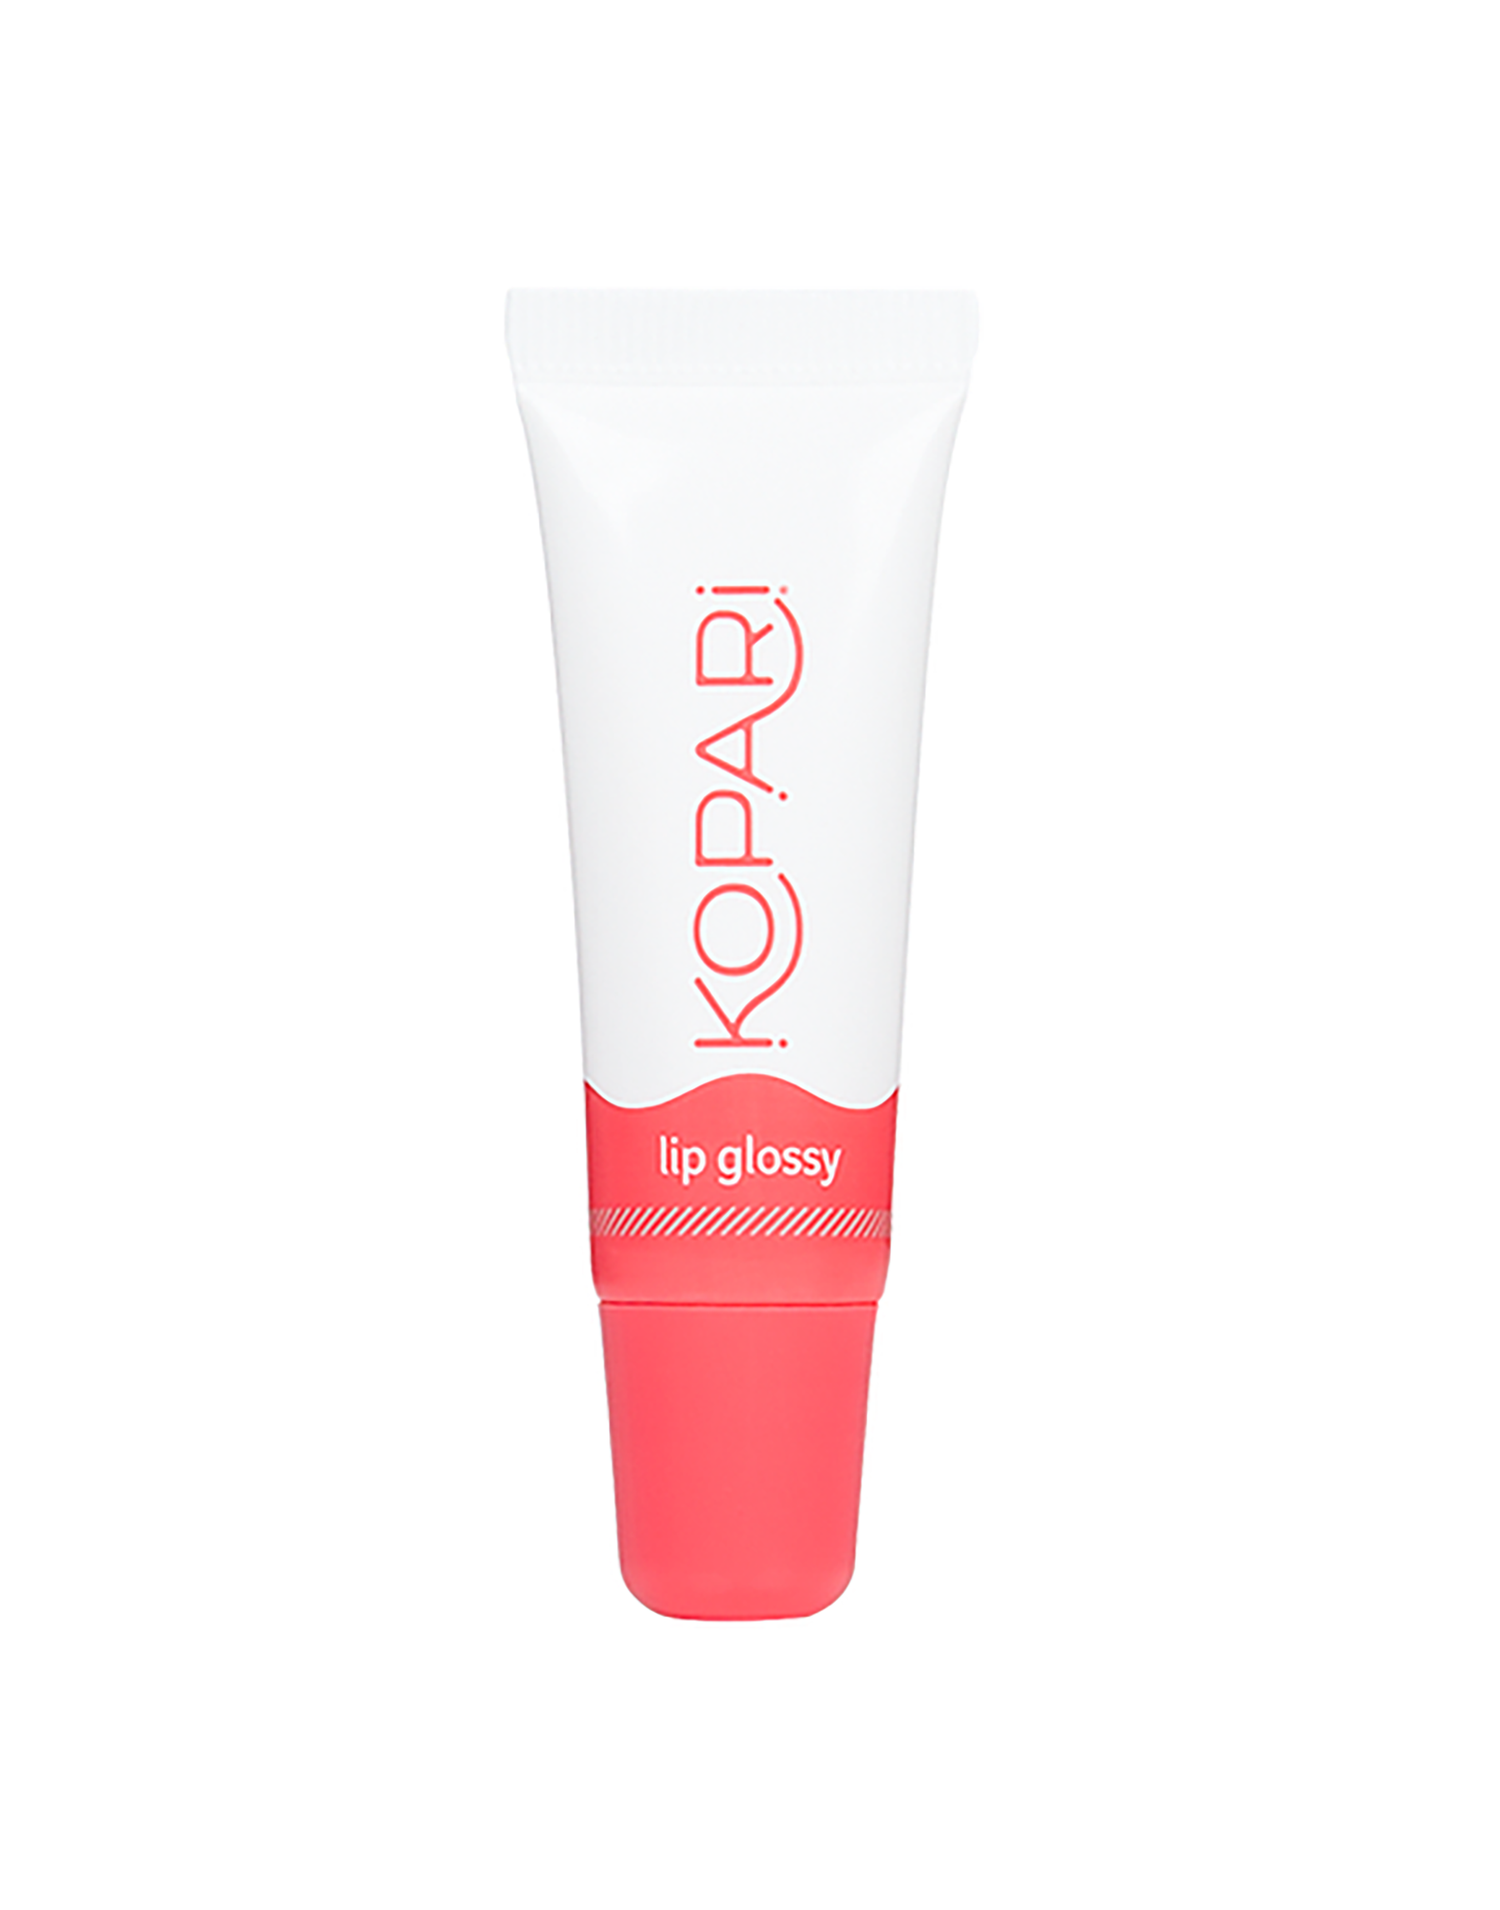 Lip Glossy by Kopari in Clear - Alternate Product View